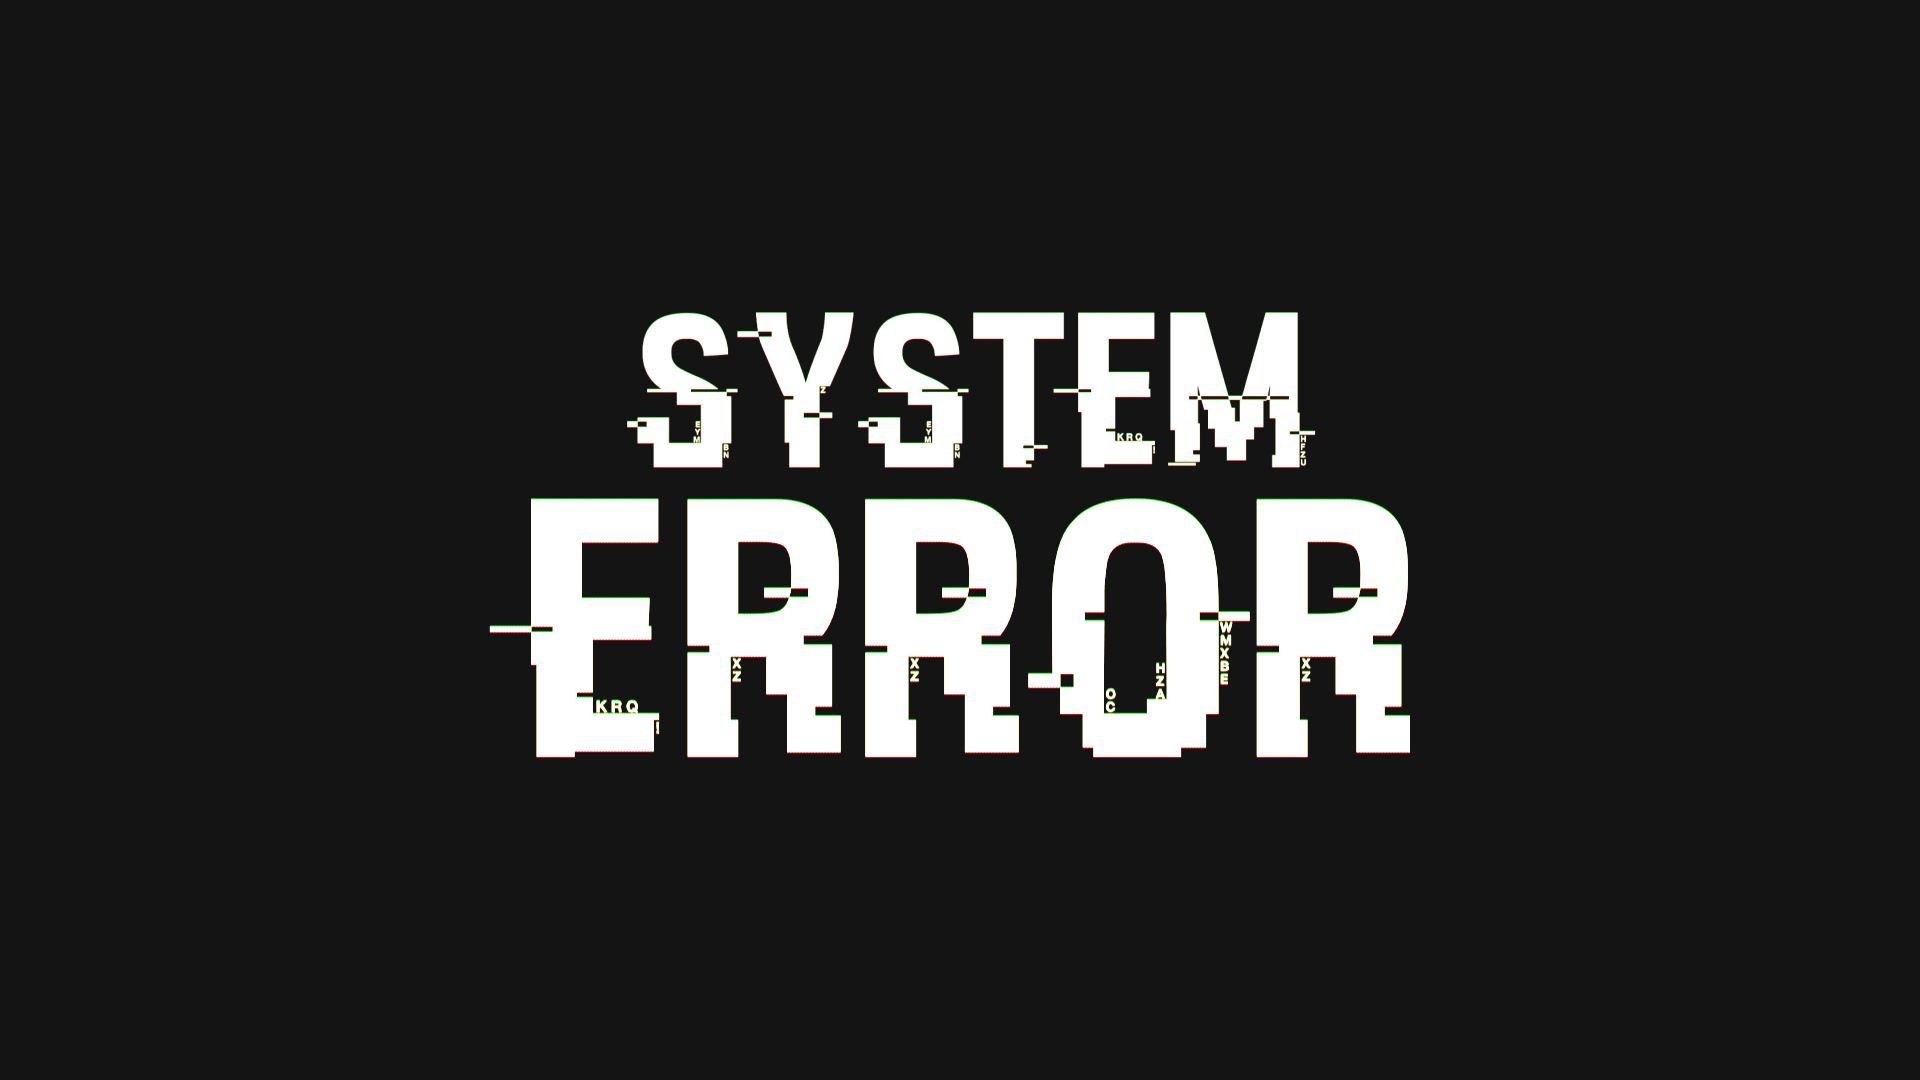 System Error Text Alpha Channel Stock Footage, #Text#Error#System